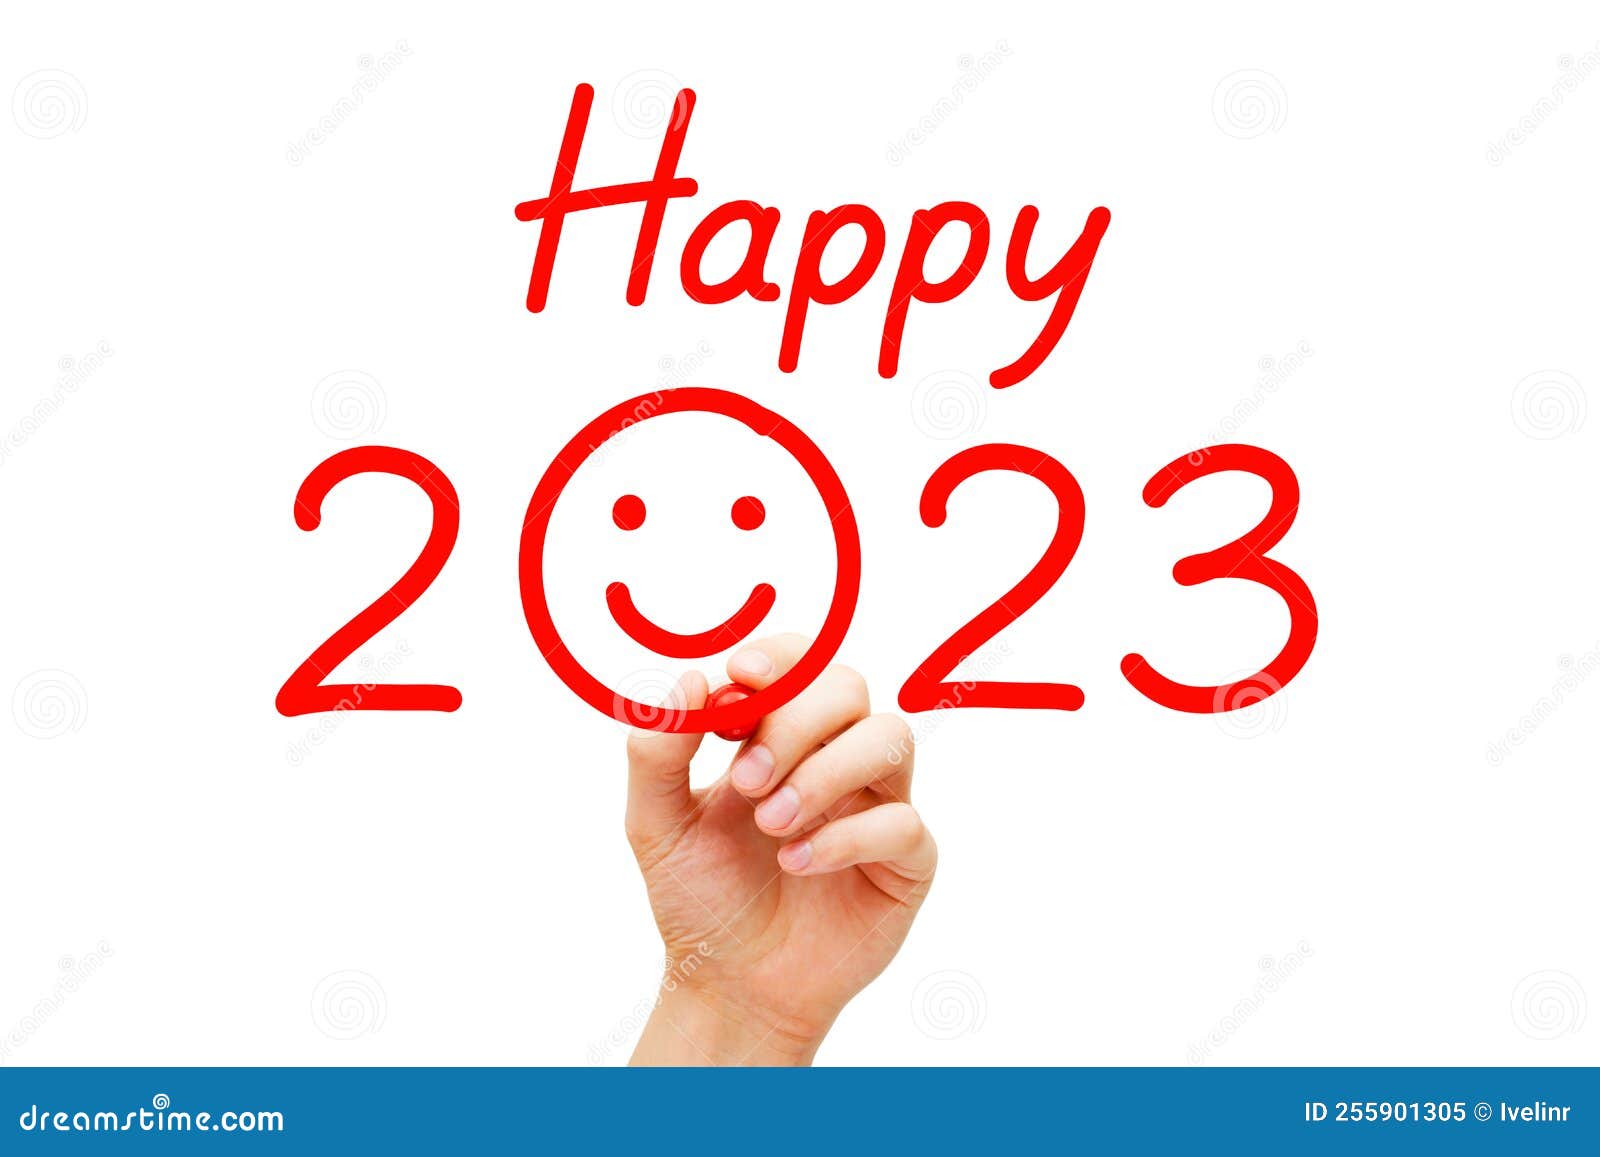 2022 Happy New Year 2022 New Year 2022, Drawing, Cartoon, Snowman, Frosty  The Snowman, png | PNGWing